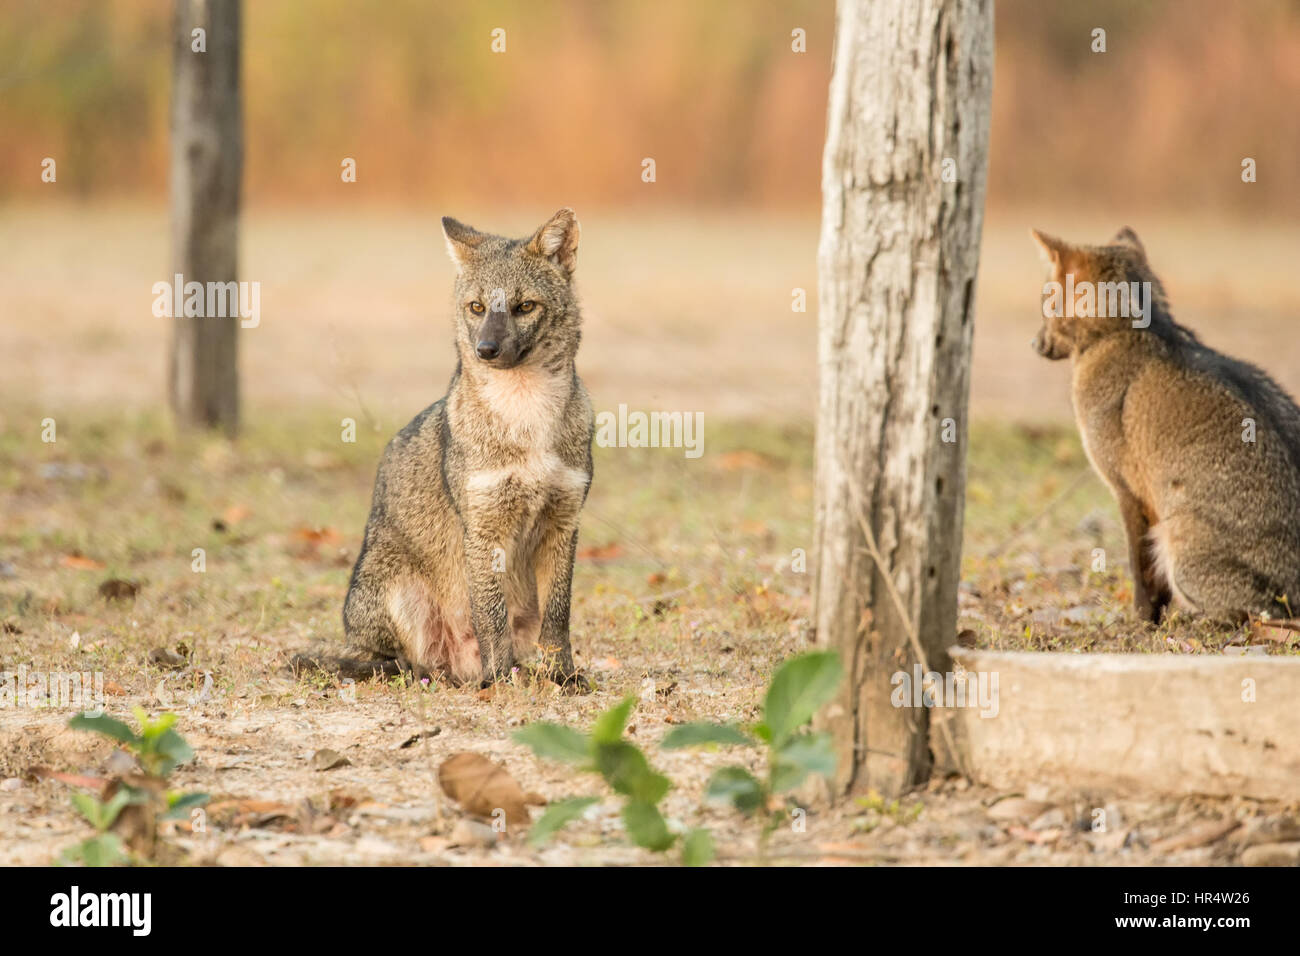 Two Crab-eating Foxes at sunrise in the Pantanal region of Brazil, Mato Grosso, South America.  The crab-eating fox searches for crabs on muddy floodp Stock Photo